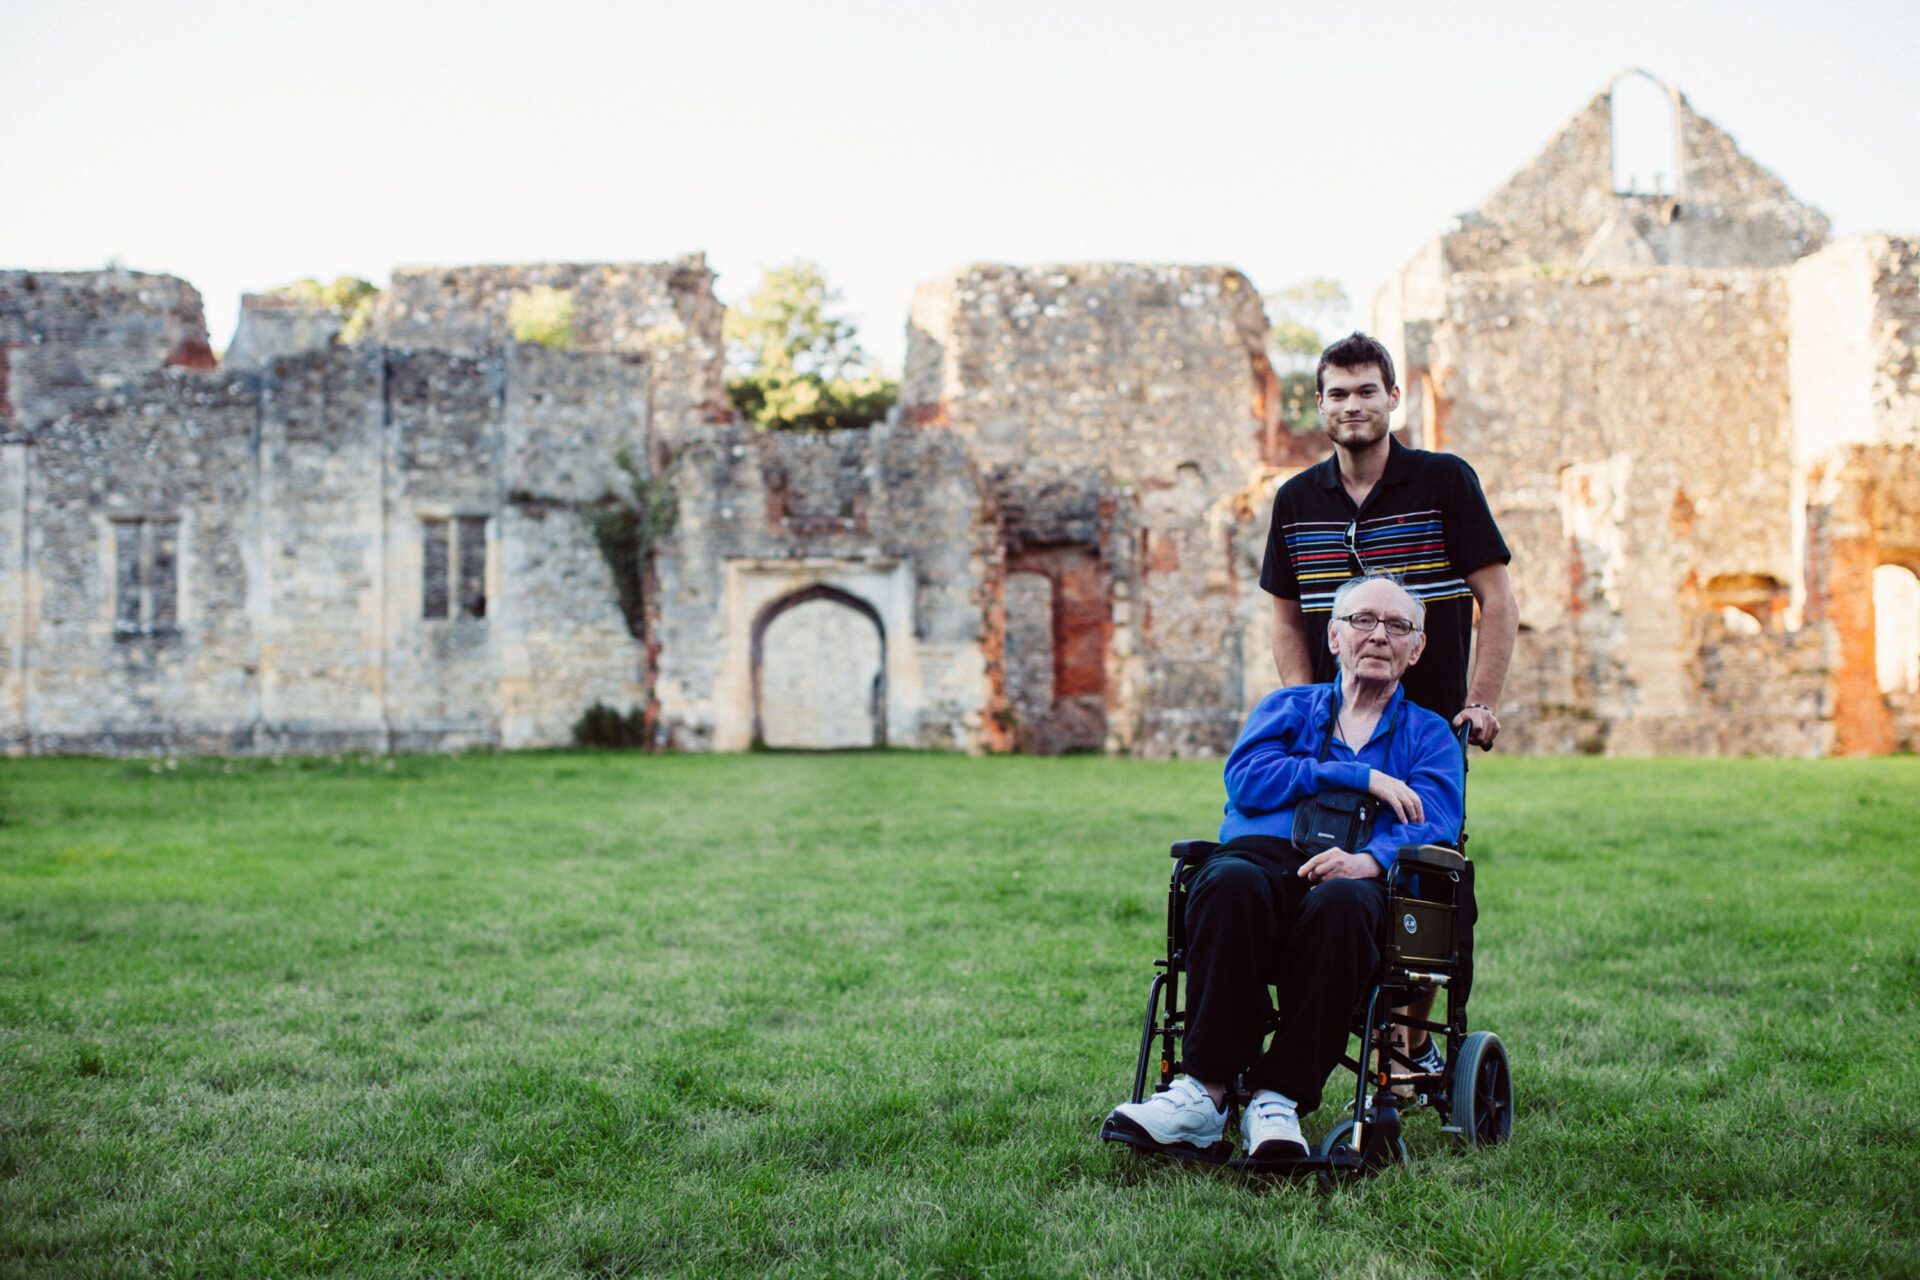 Revitalise wheelchair using guest and volunteer on an excursion outside old building